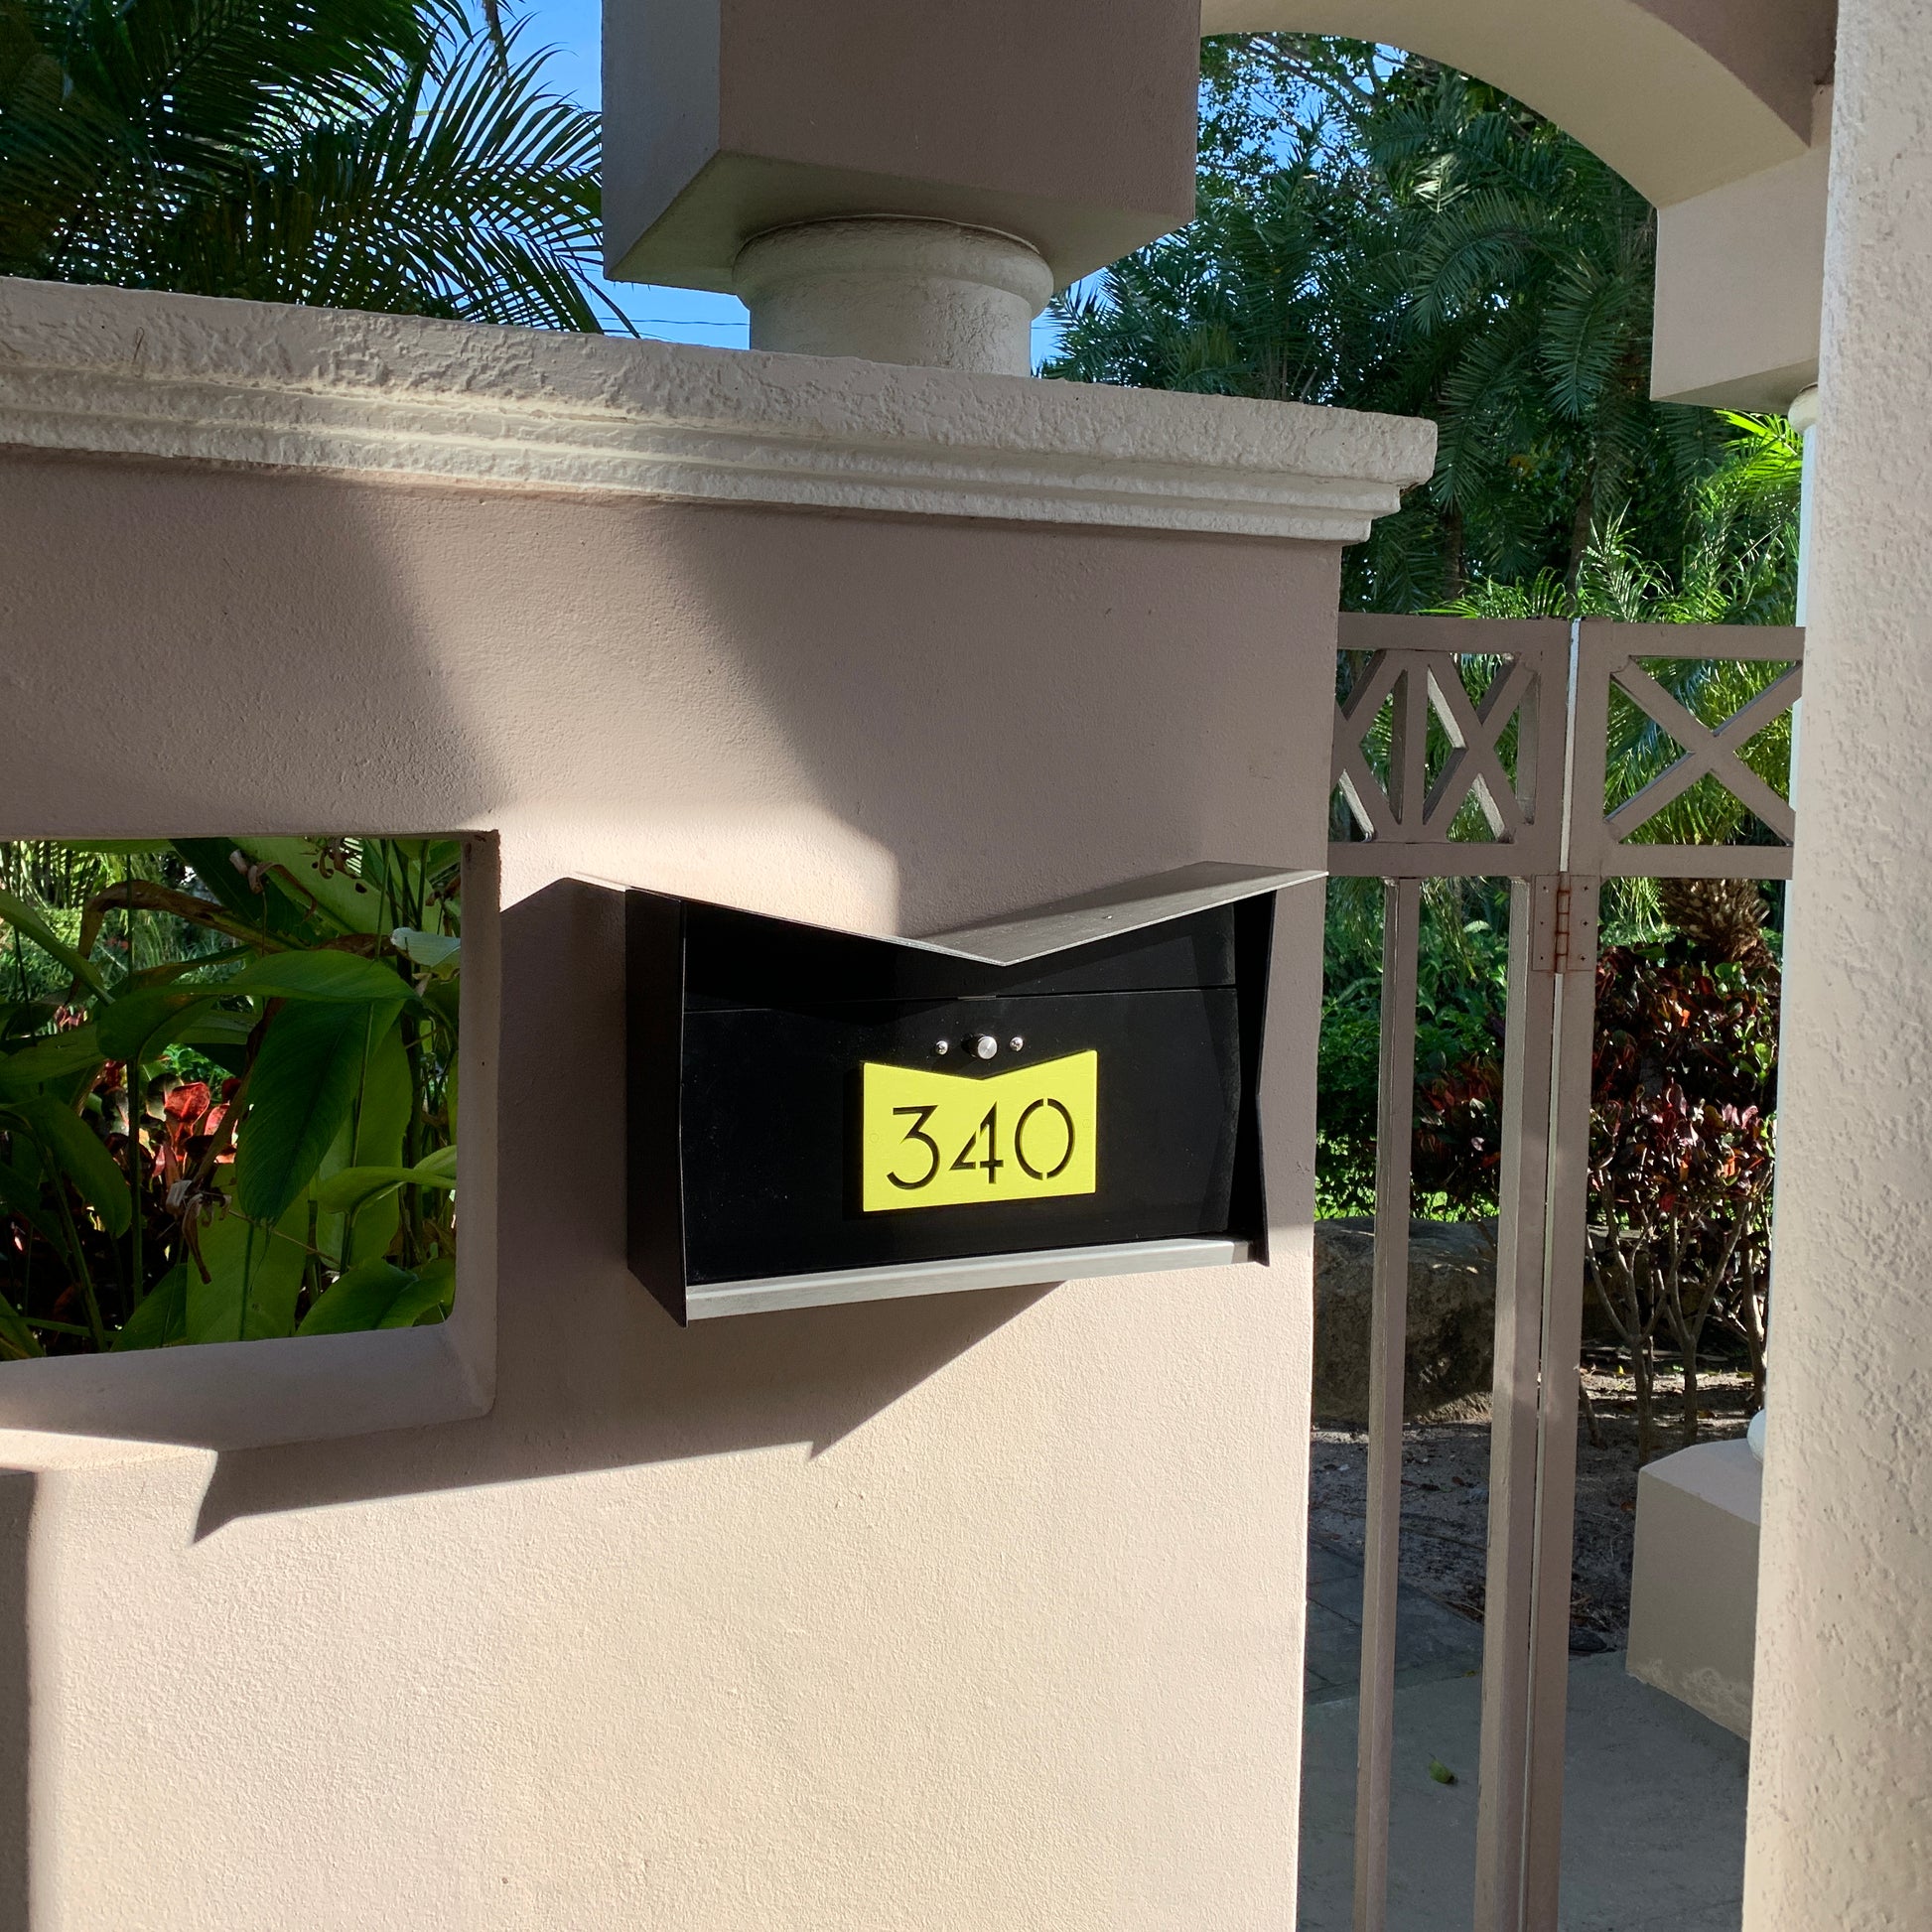 Wall Mount Mailbox mounted to outdoor wall. ButterFly Box in jet black and lemon lime